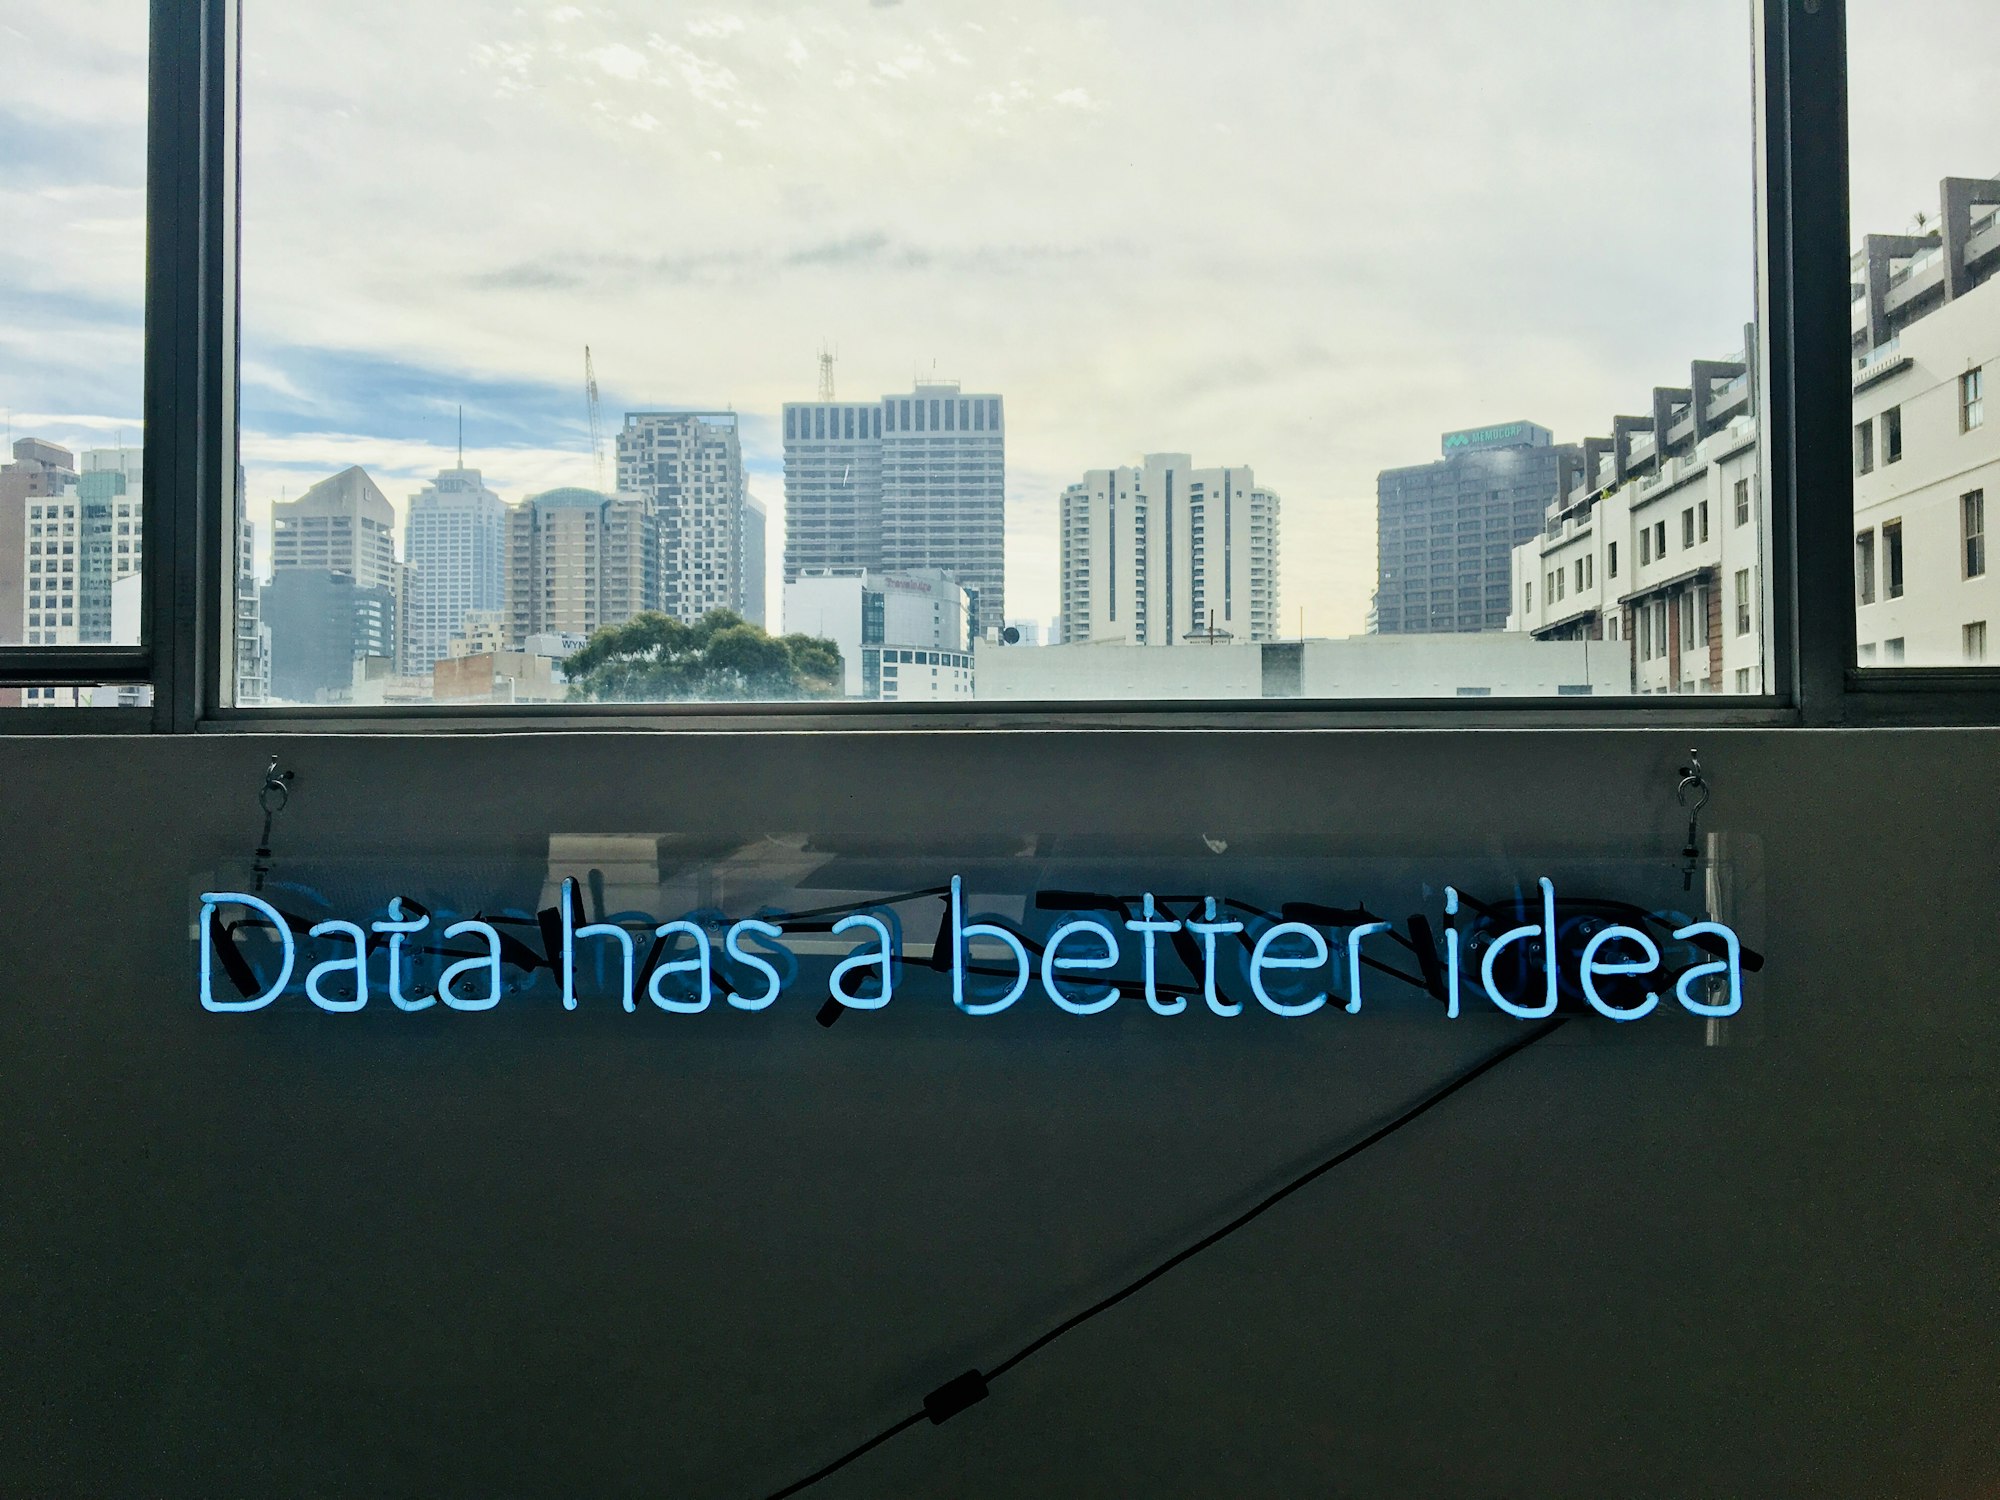 Neon sign in a building under a window that reads "Data has a better idea".